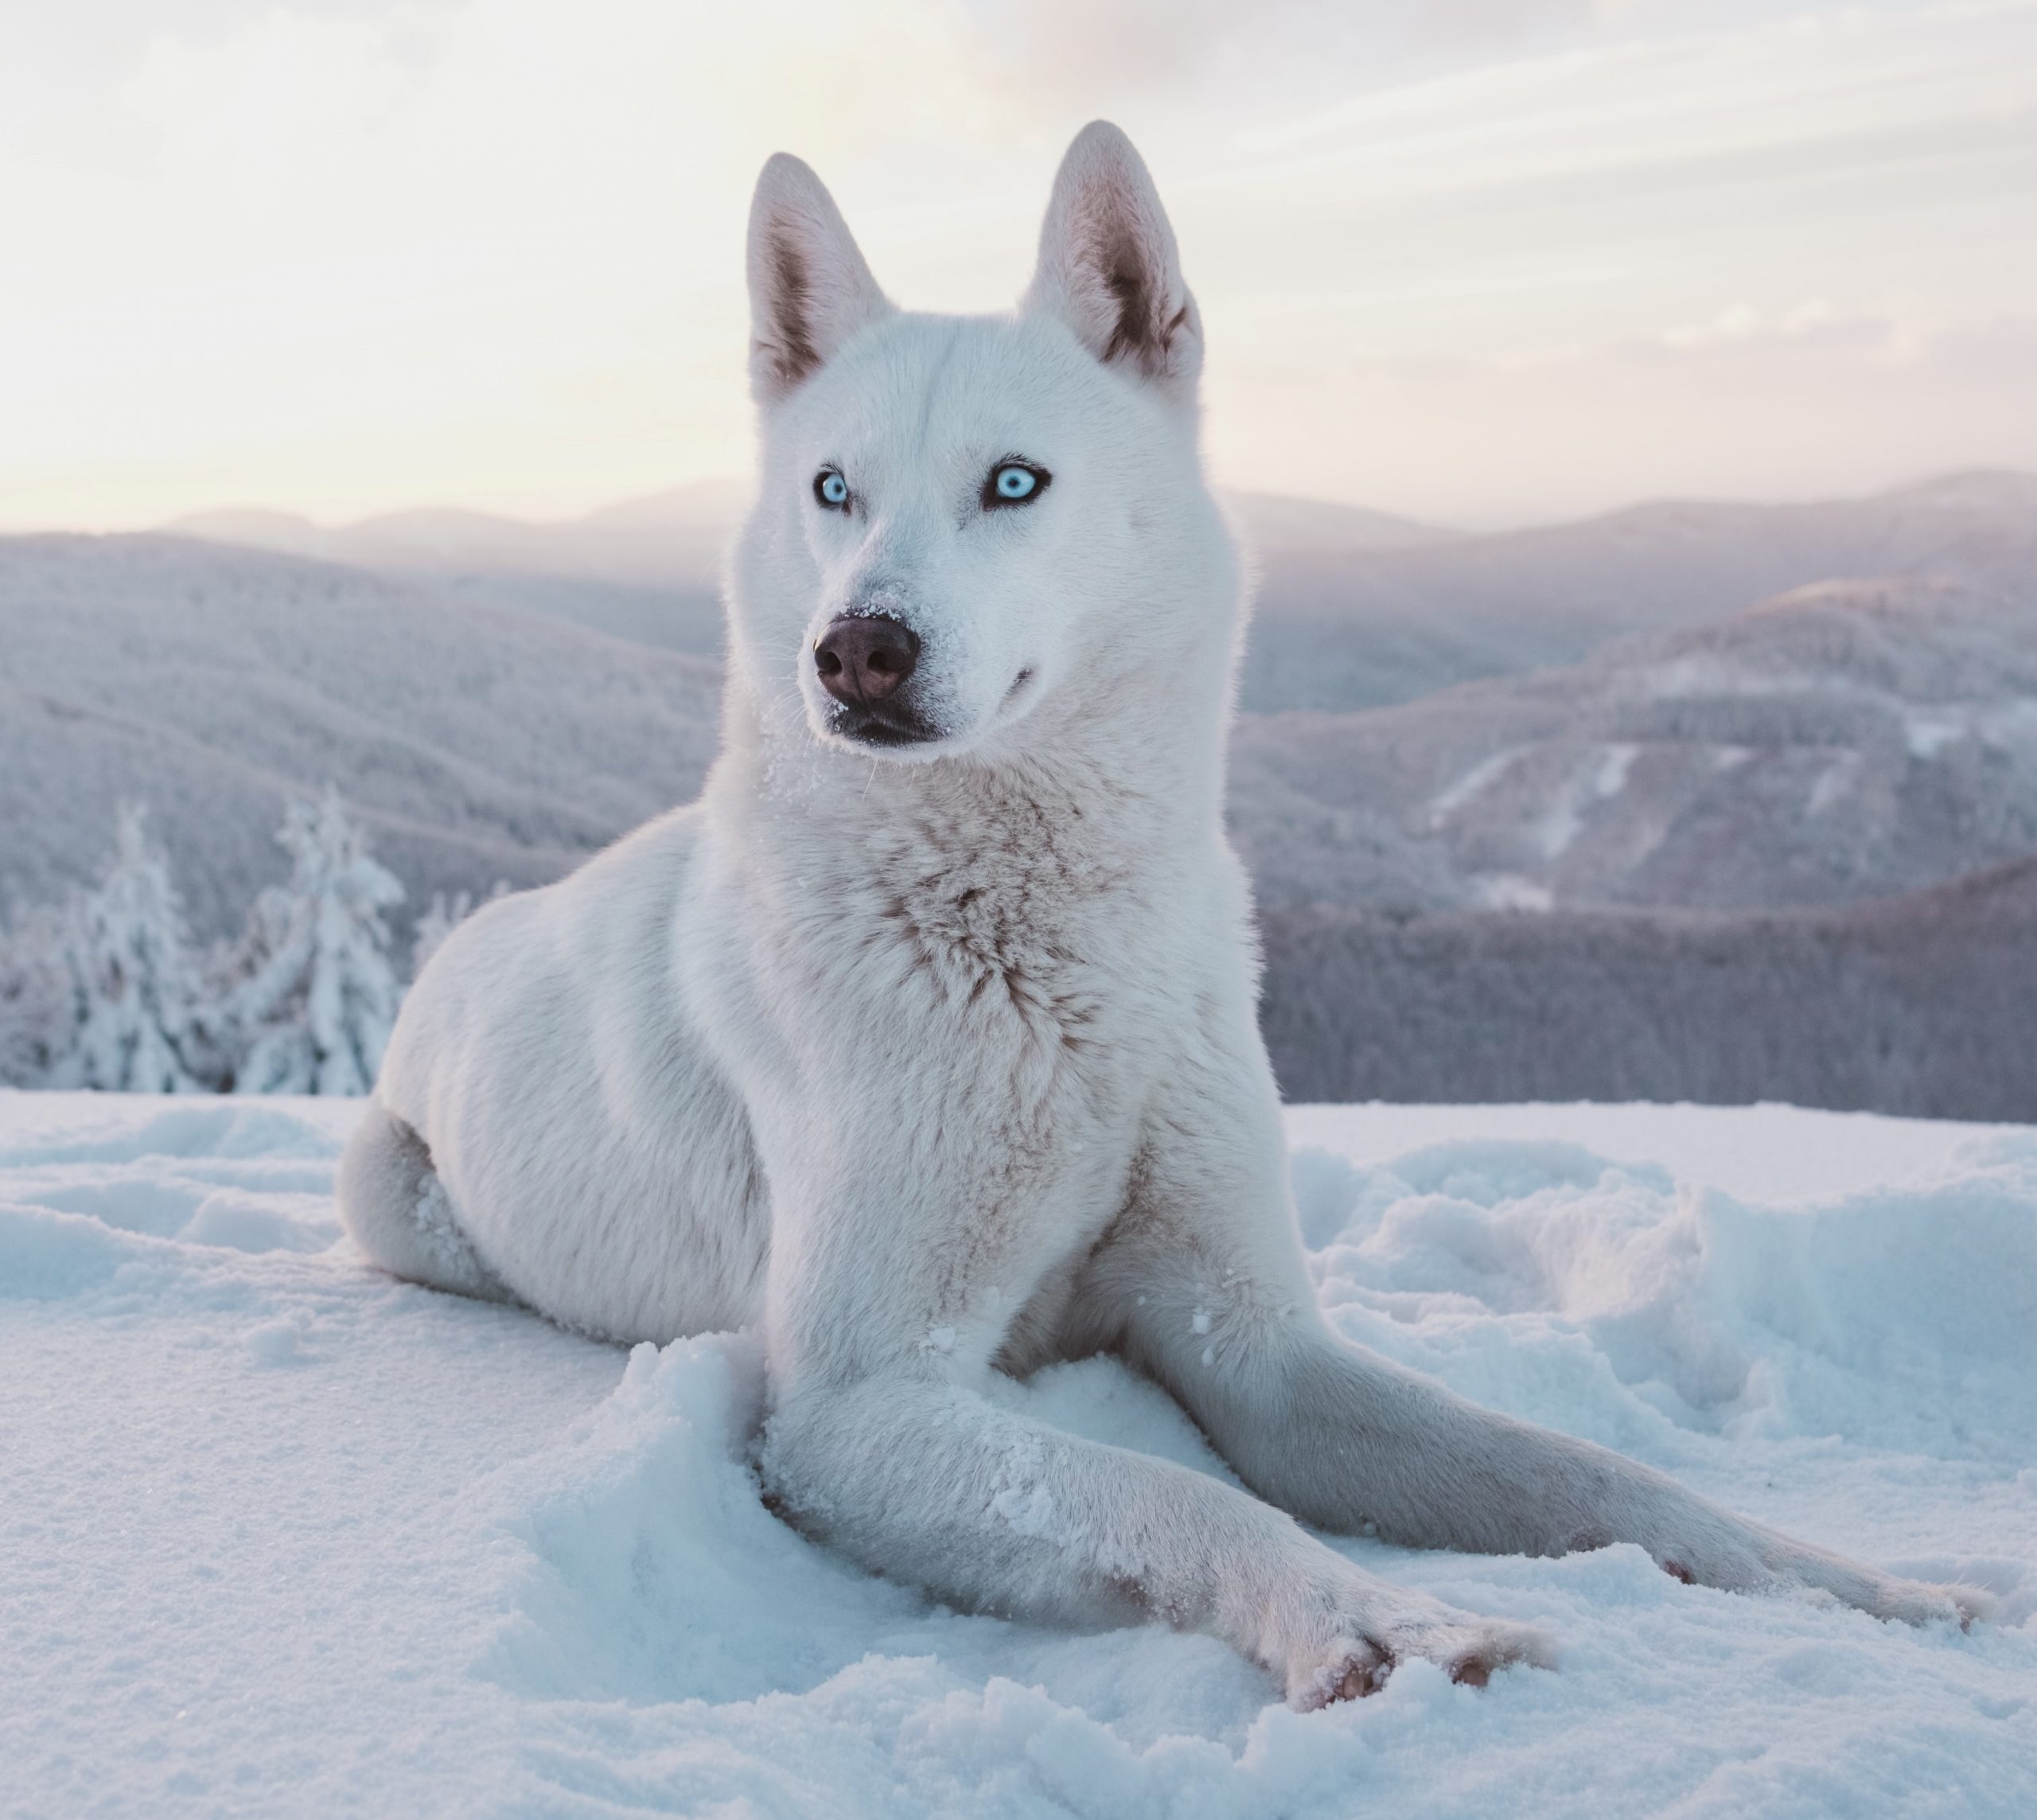 Winter is Coming: Beware of Dog Frostbite